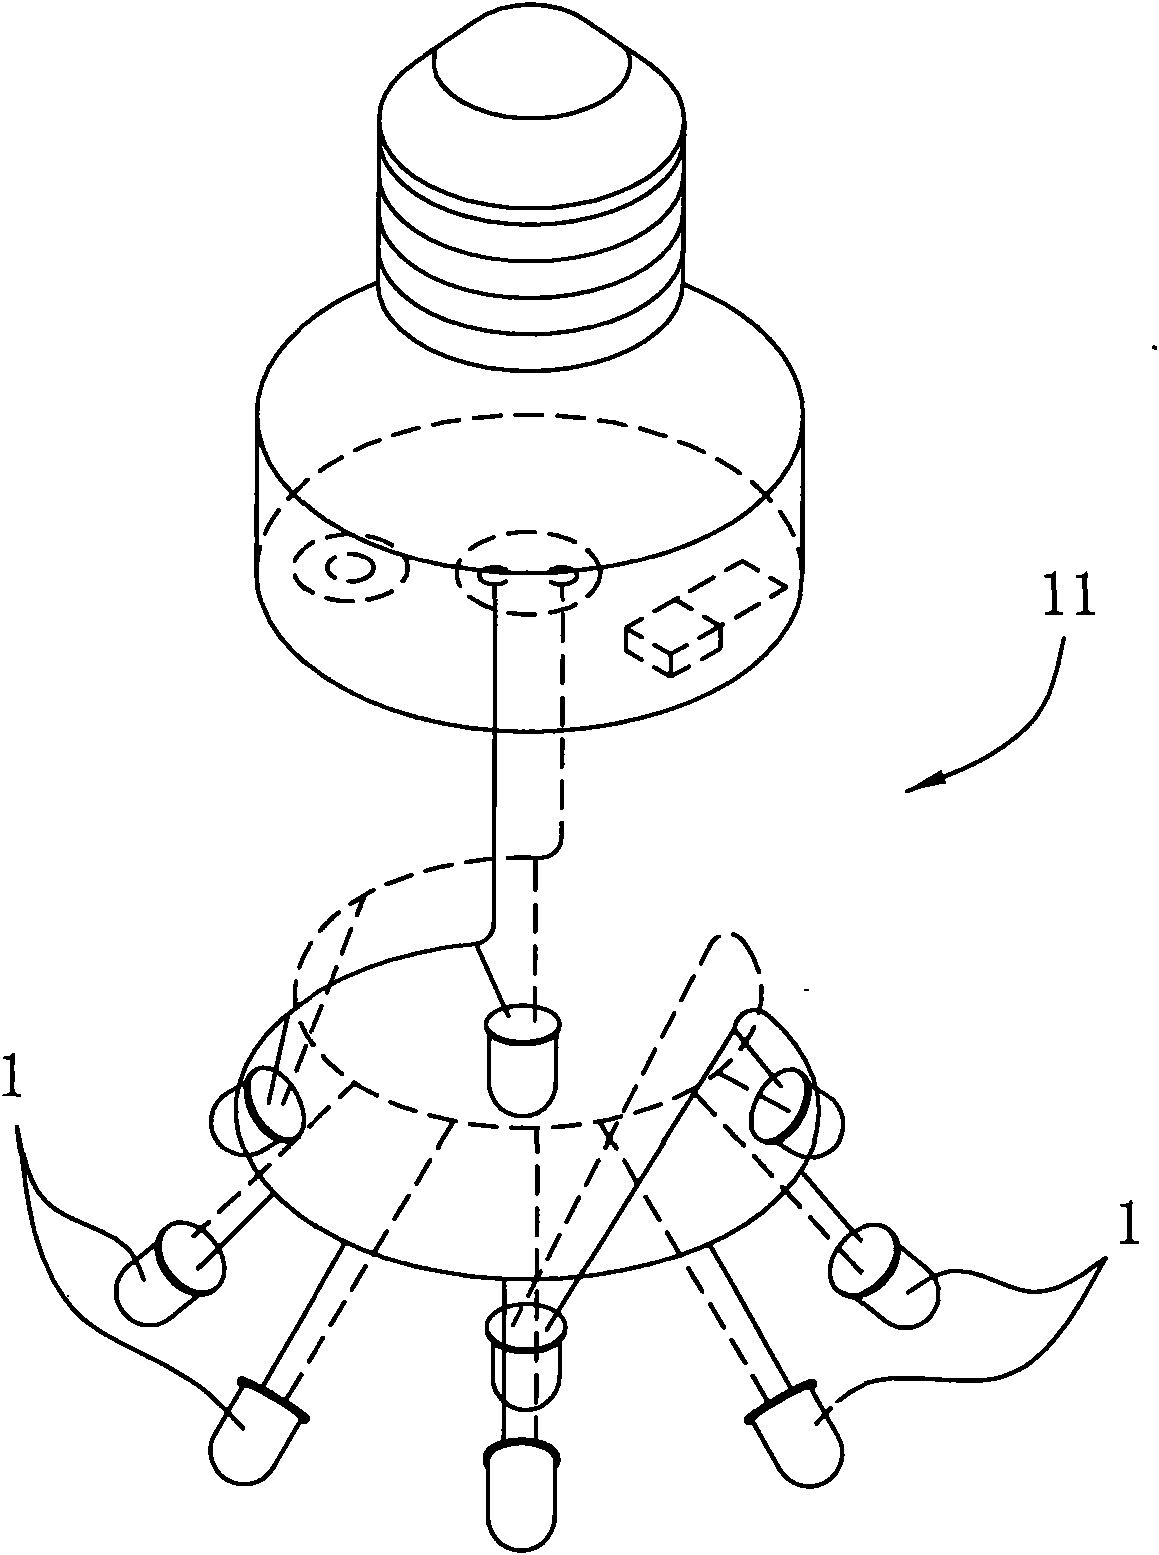 Light illuminating device and system for killing insects or/and interfering with insects, and insect killing method